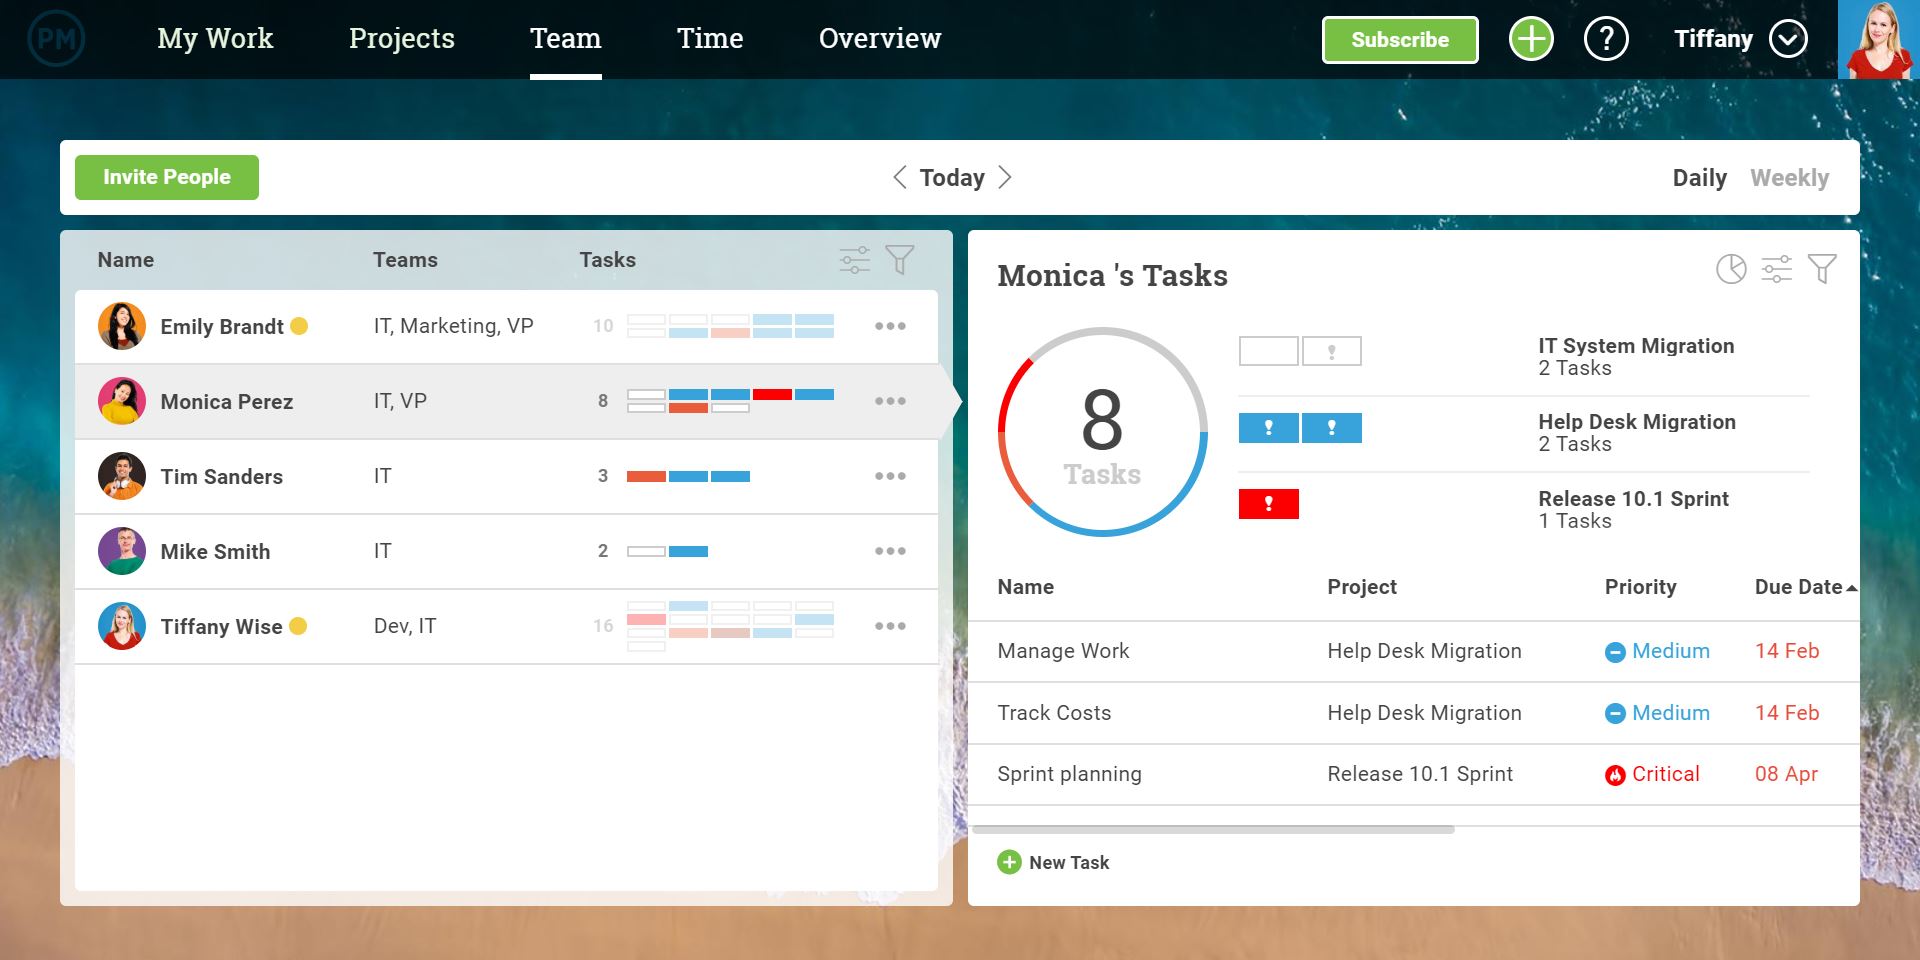 Team view in ProjectManager.com, showing the different members assigned to a project with key statistics, including progress on tasks, team roles, and whether they're ahead or behind schedule.